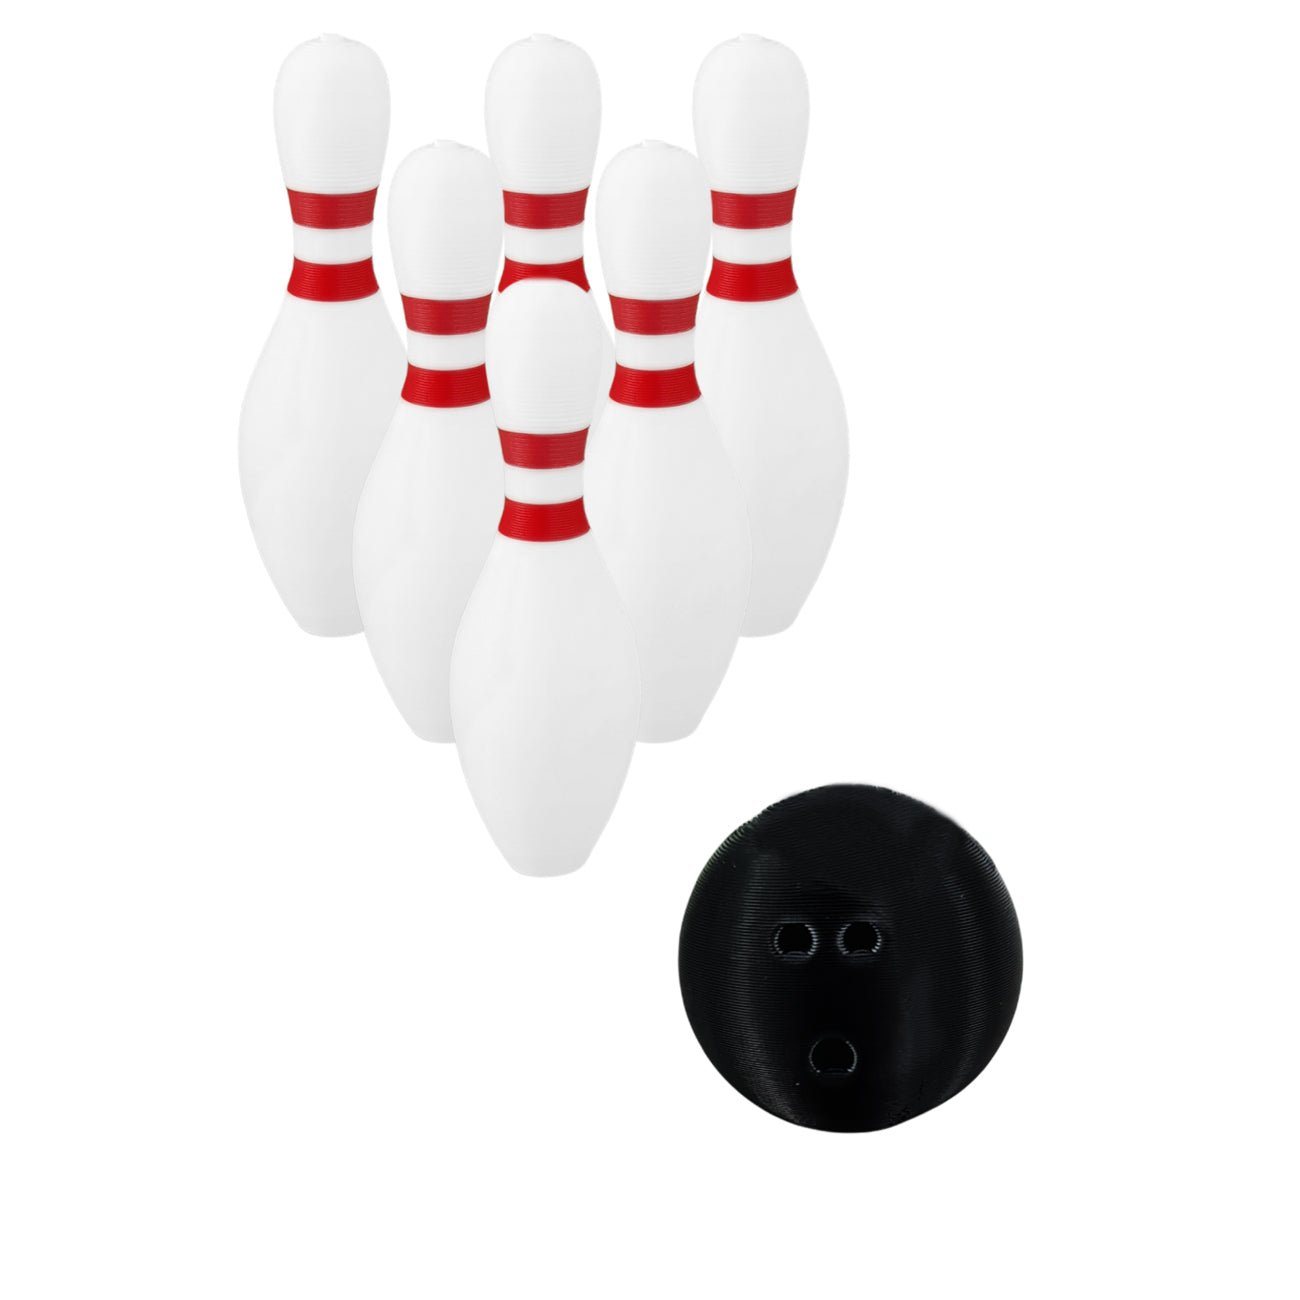 elf bowling with 6 bowling pins and miniature bowling ball